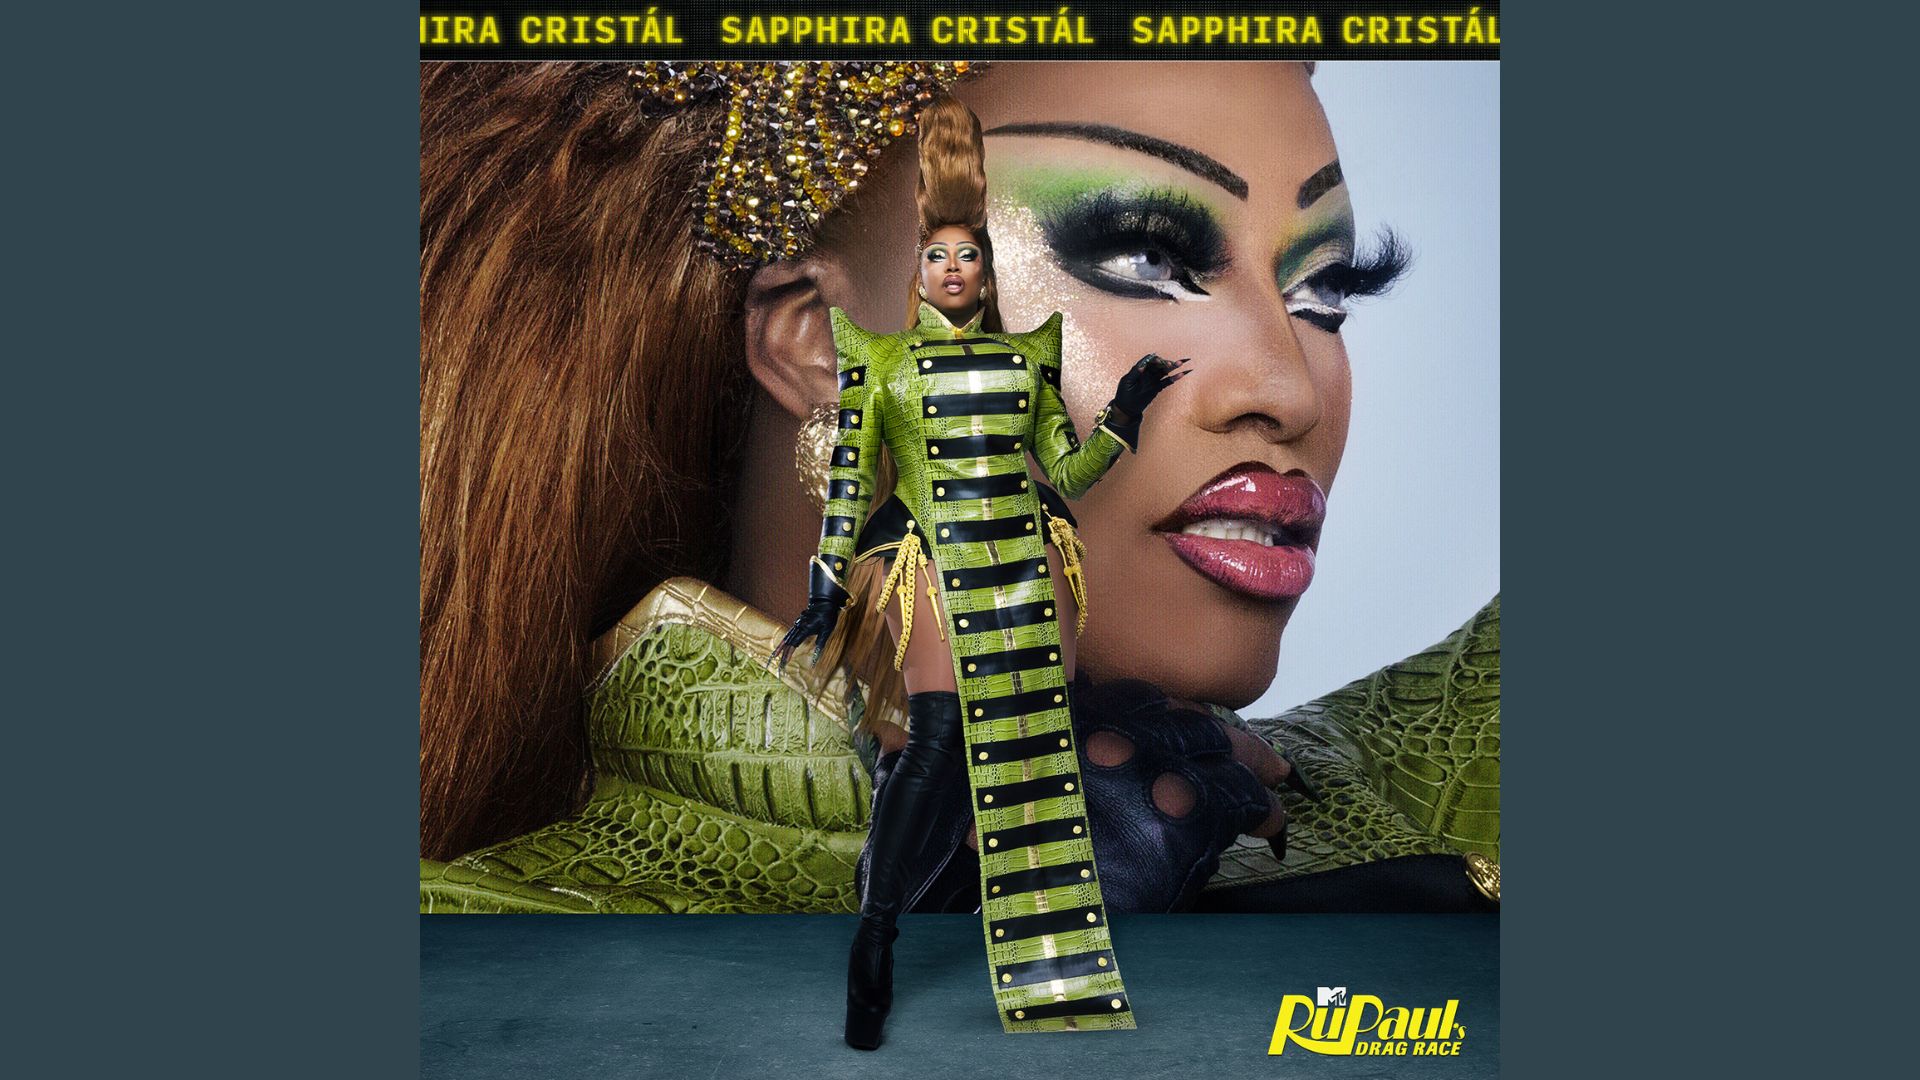 Philly queen Sapphira Cristál talks competing on 'RuPaul's Drag